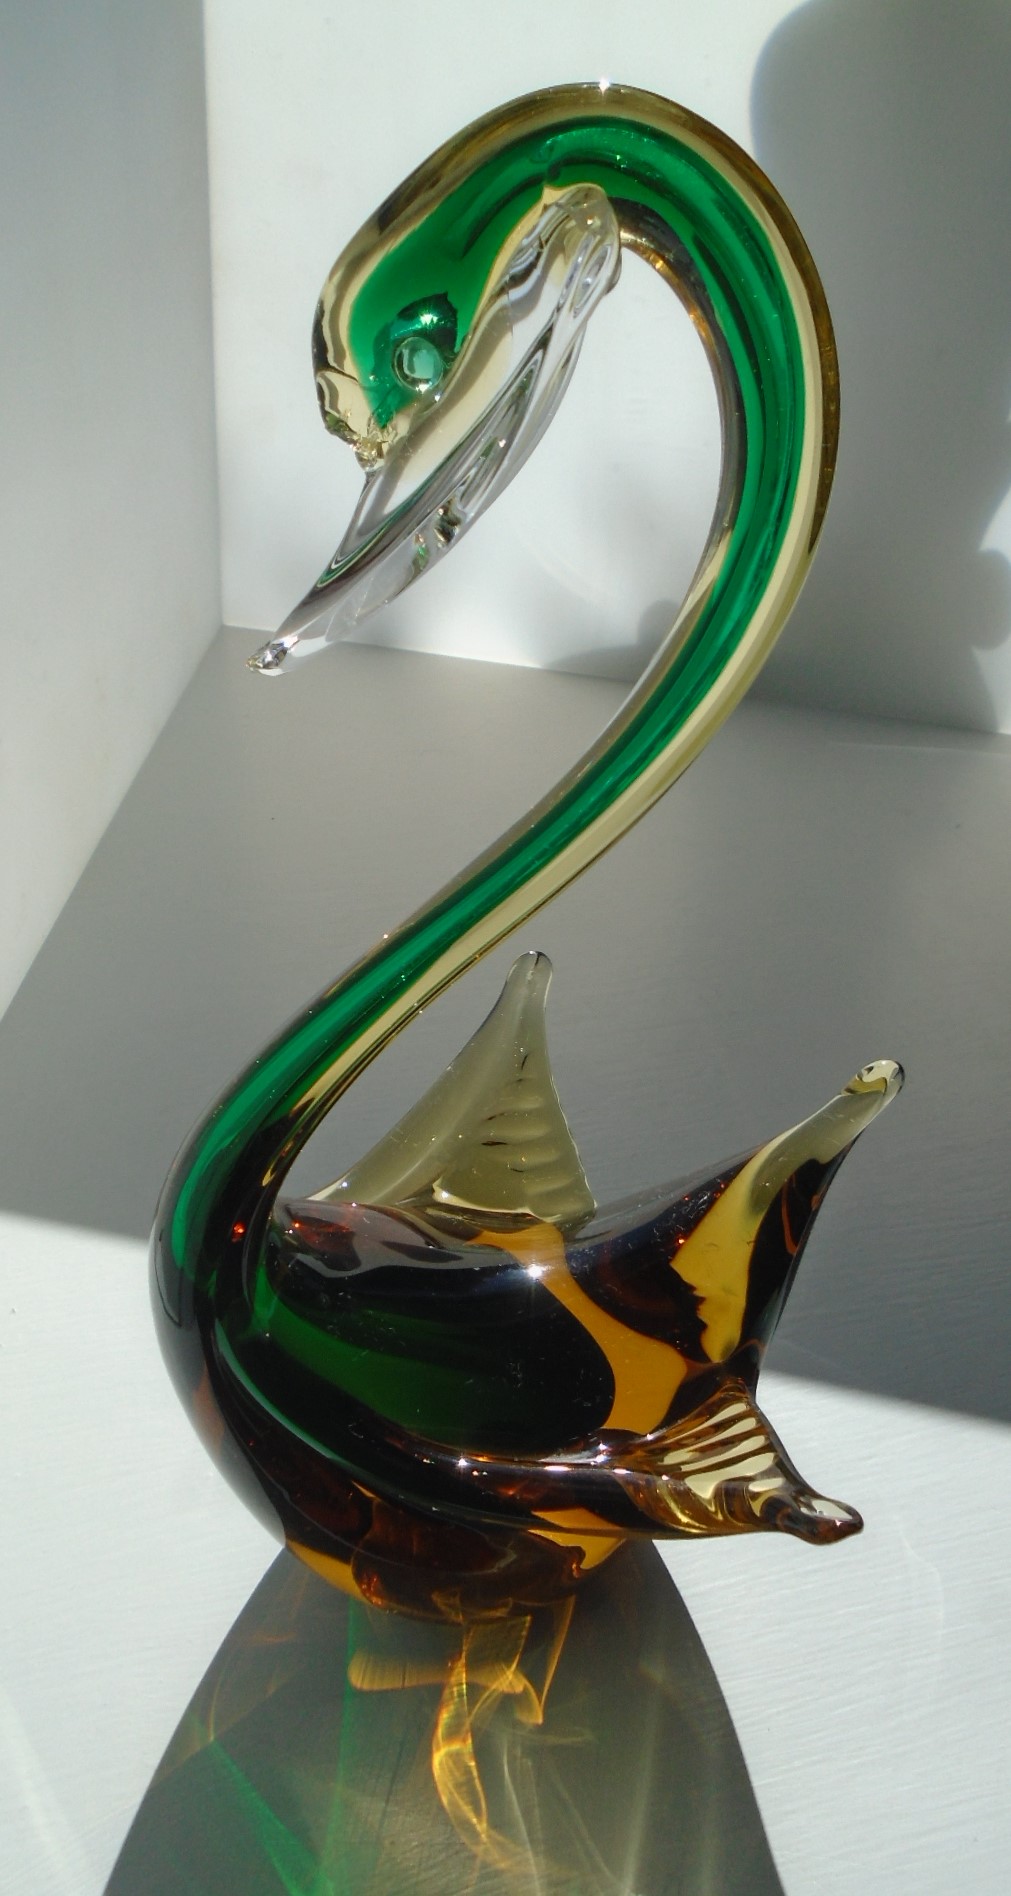 Vintage Murano Glass Swan. It measues  26cms in height and is approx. 13.5cms wide.